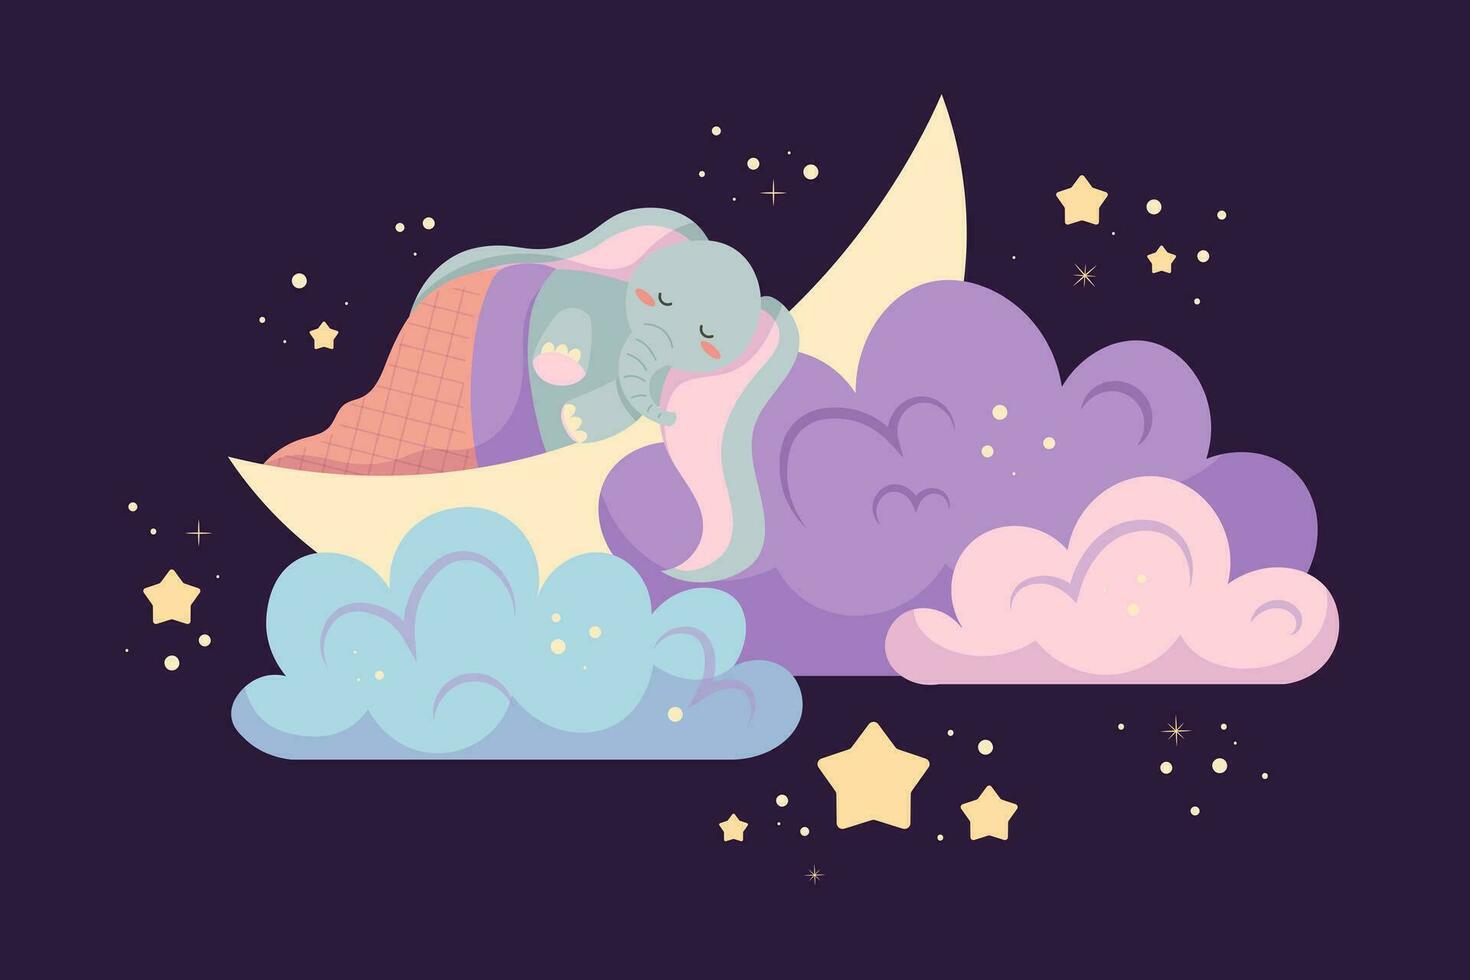 Cute baby elephant covered with blanket sleeps on the moon in the clouds. Simple vector illustration for kids